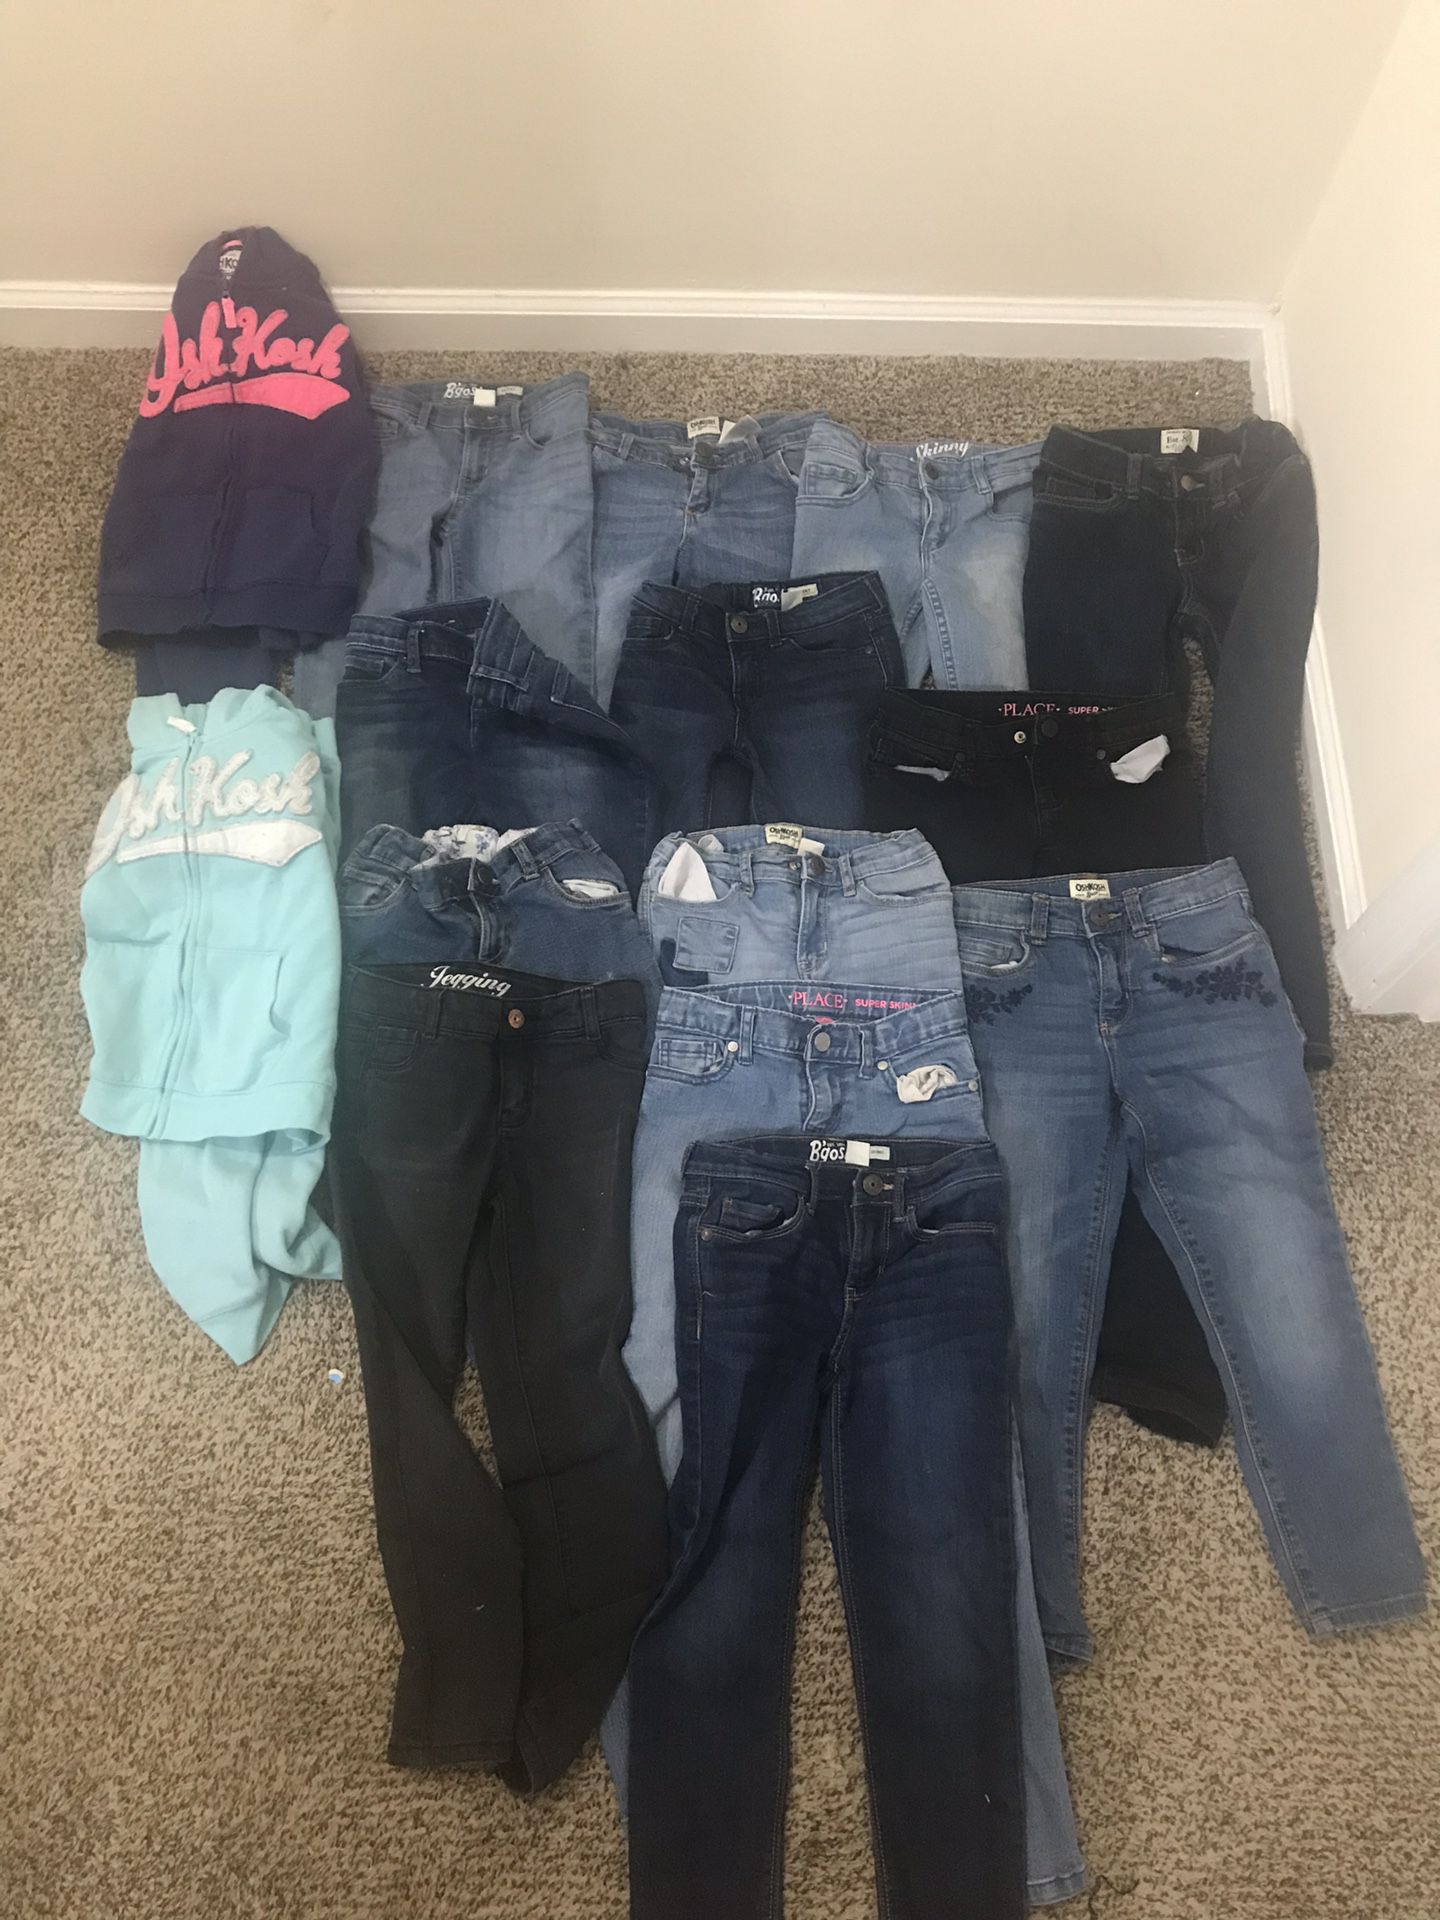 GIRLS JEANS SIZE 6, 4 beautiful floral and solid dress shirts, and two OSHKOSH sweatsuits!!! $65.00for all!!!